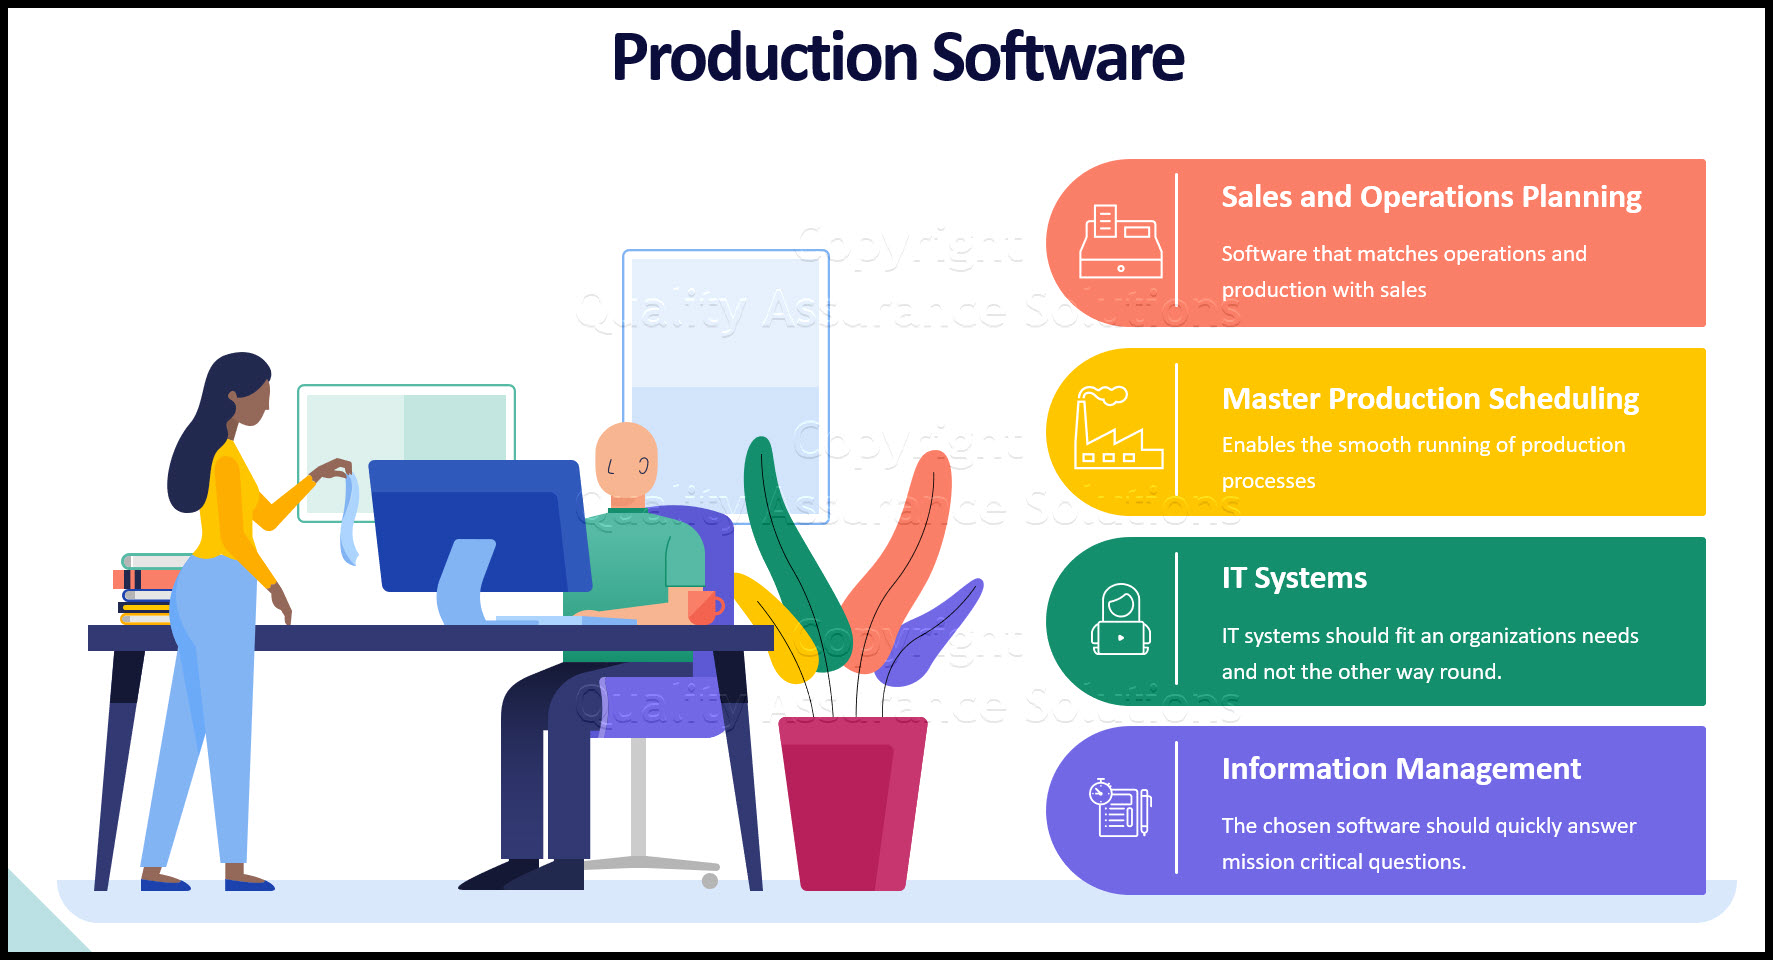 We discuss master production scheduling software and key points to consider when implementing MPS and S&OP. 